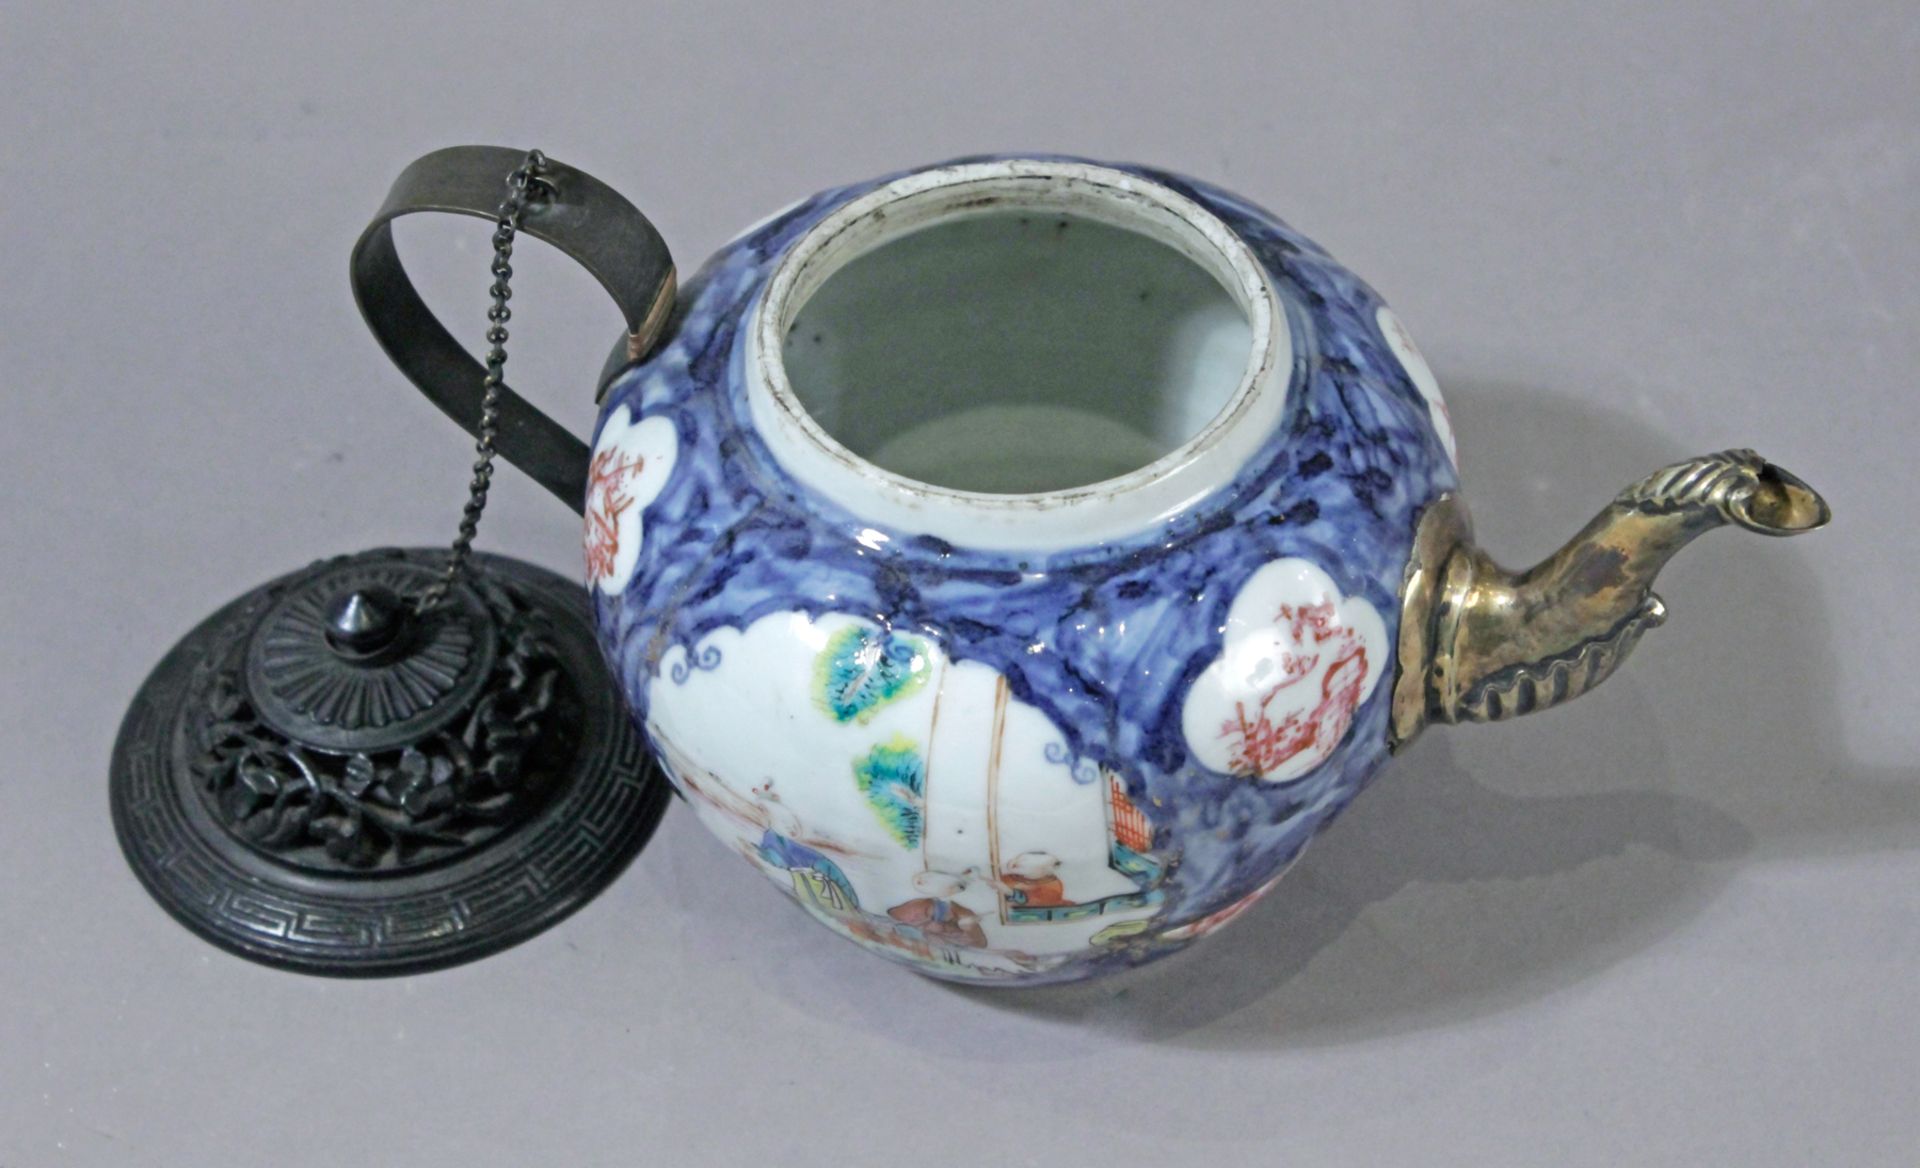 An 18th century Chinese porcelain teapot from Qing dynasty - Image 4 of 4